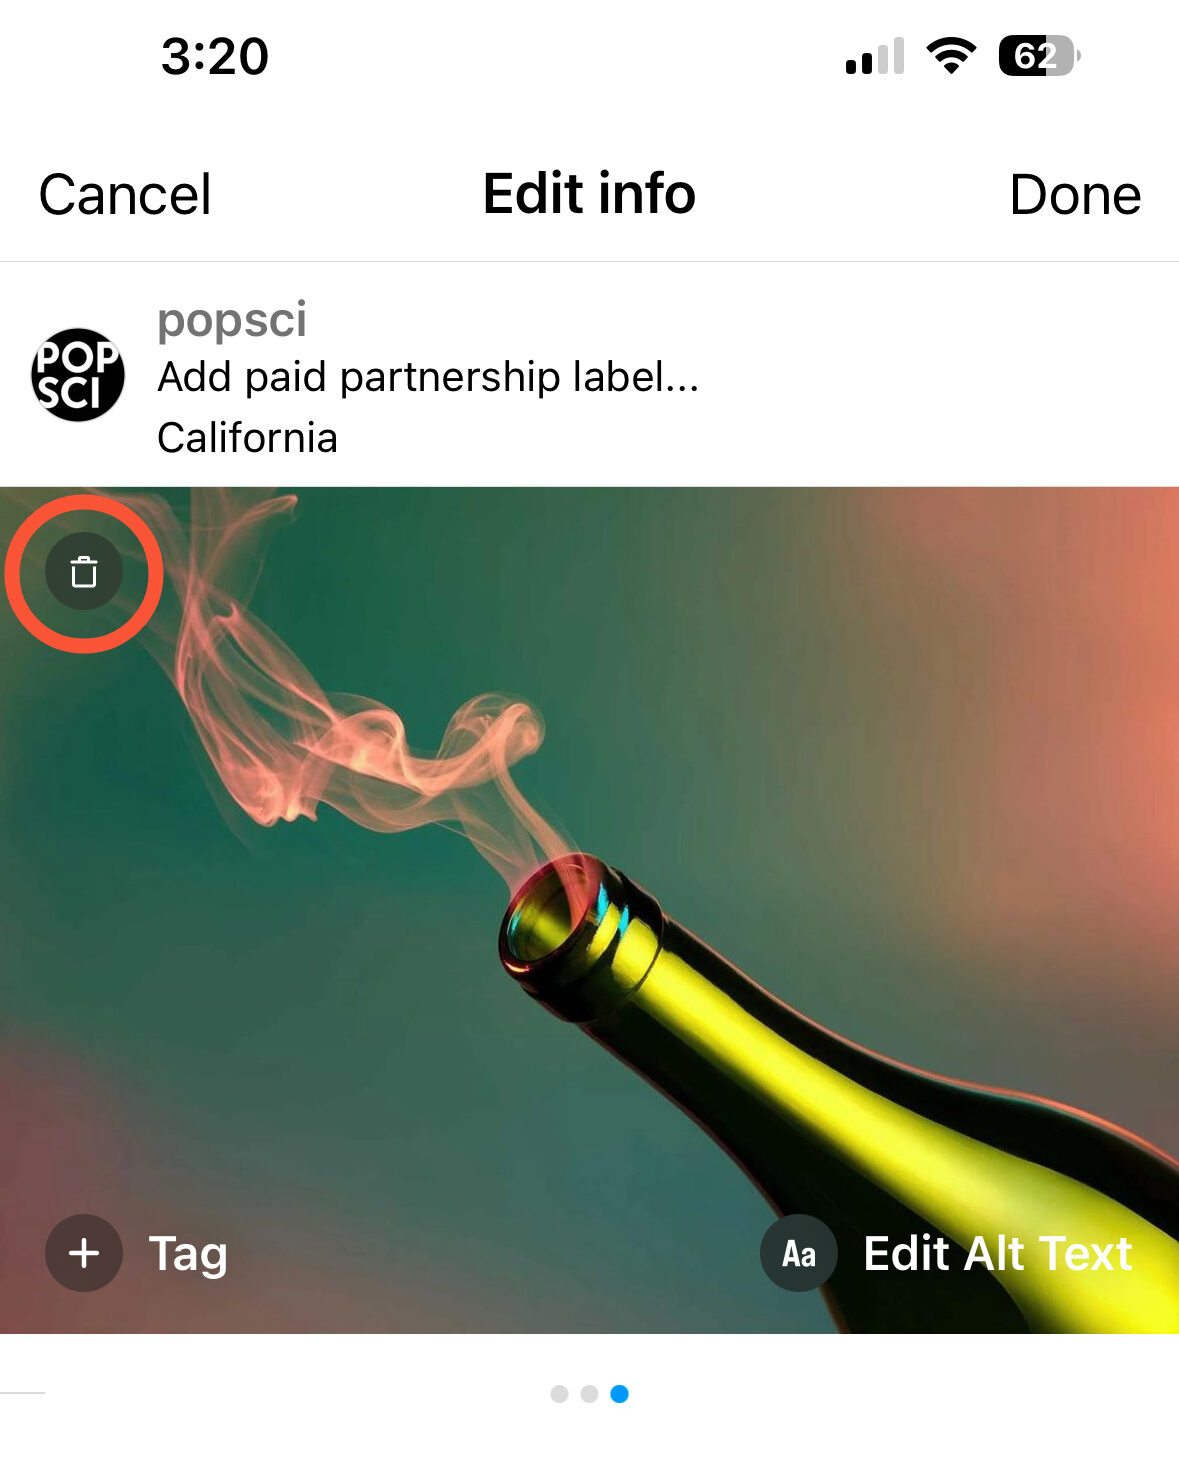 The trash can icon in the top left corner corner of an Instagram carousel photo of a bottle of wine with smoke coming out of it, used for deleting pictures from multiple-image posts.